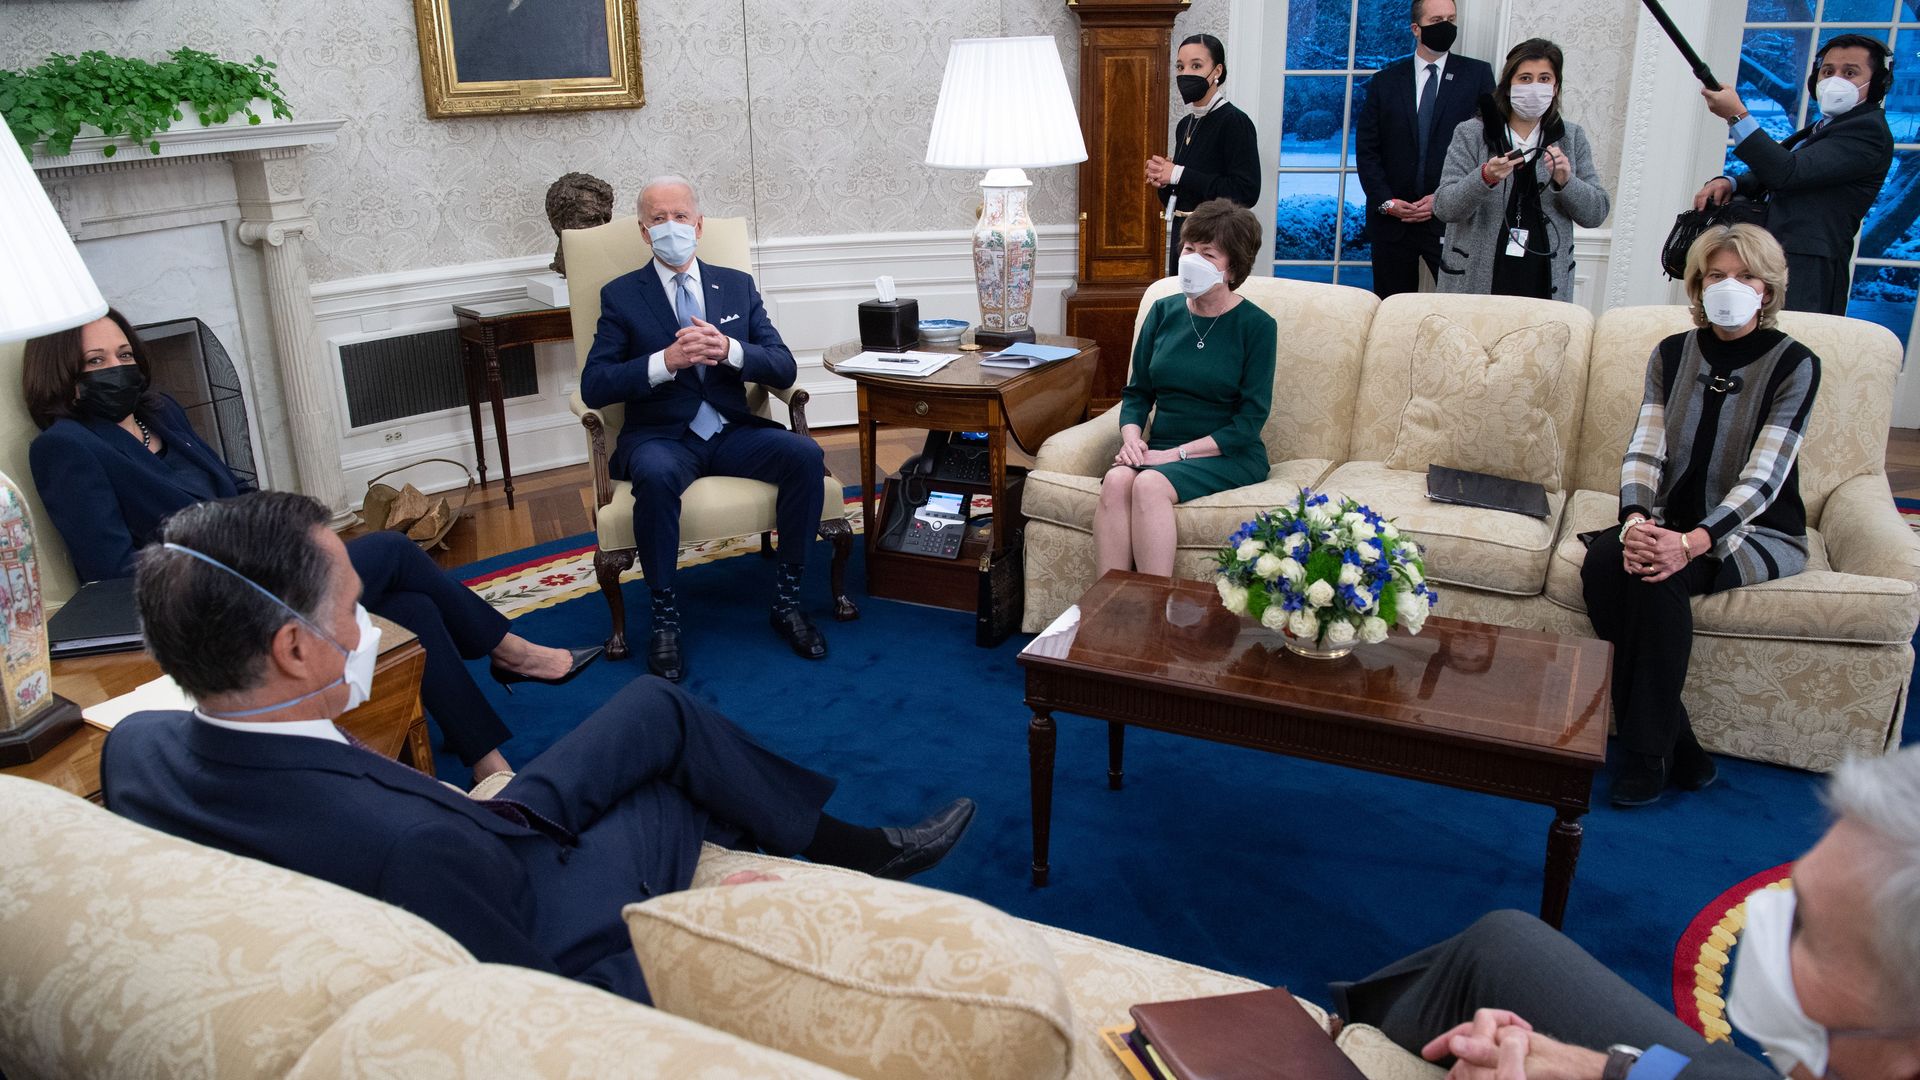 Biden with Republicans in the Oval Office